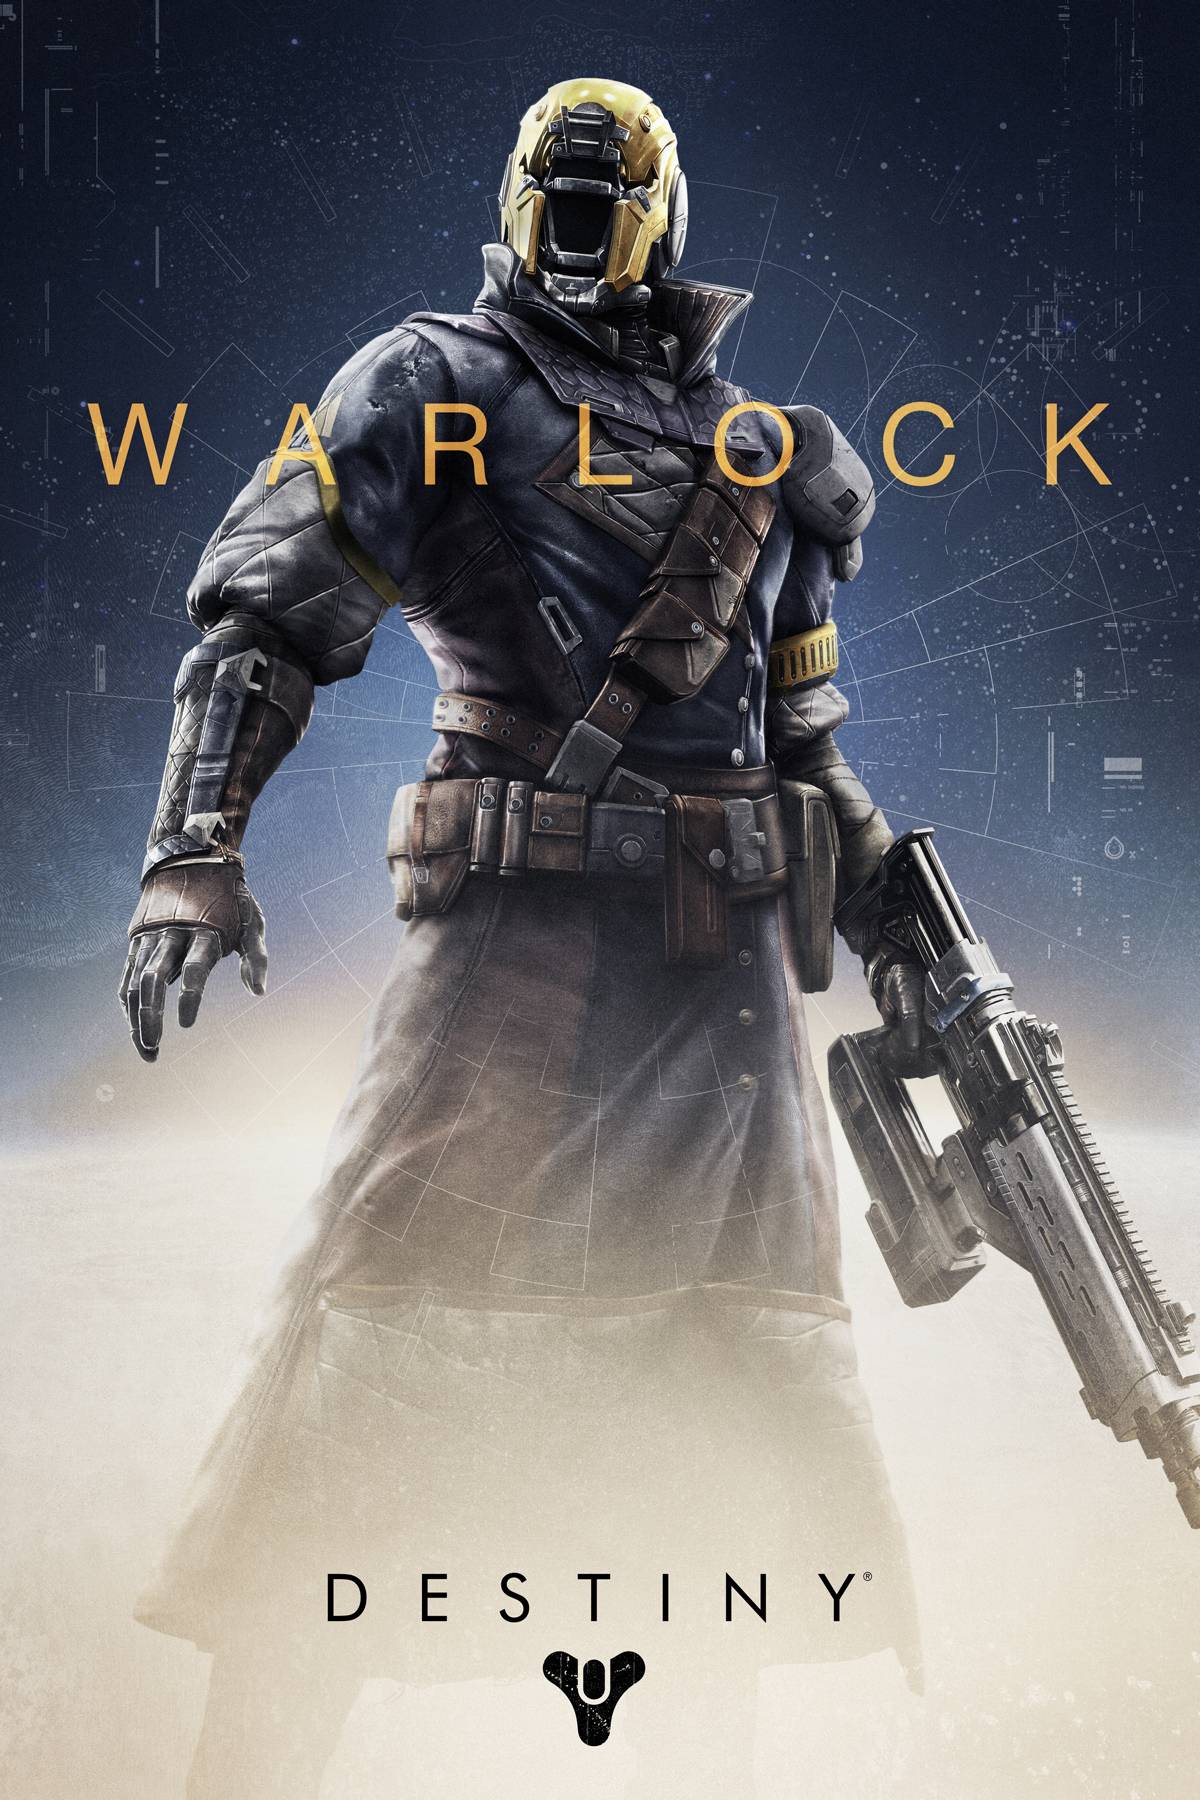 Awesome IPhone Android Destiny Wallpaper: Warlock